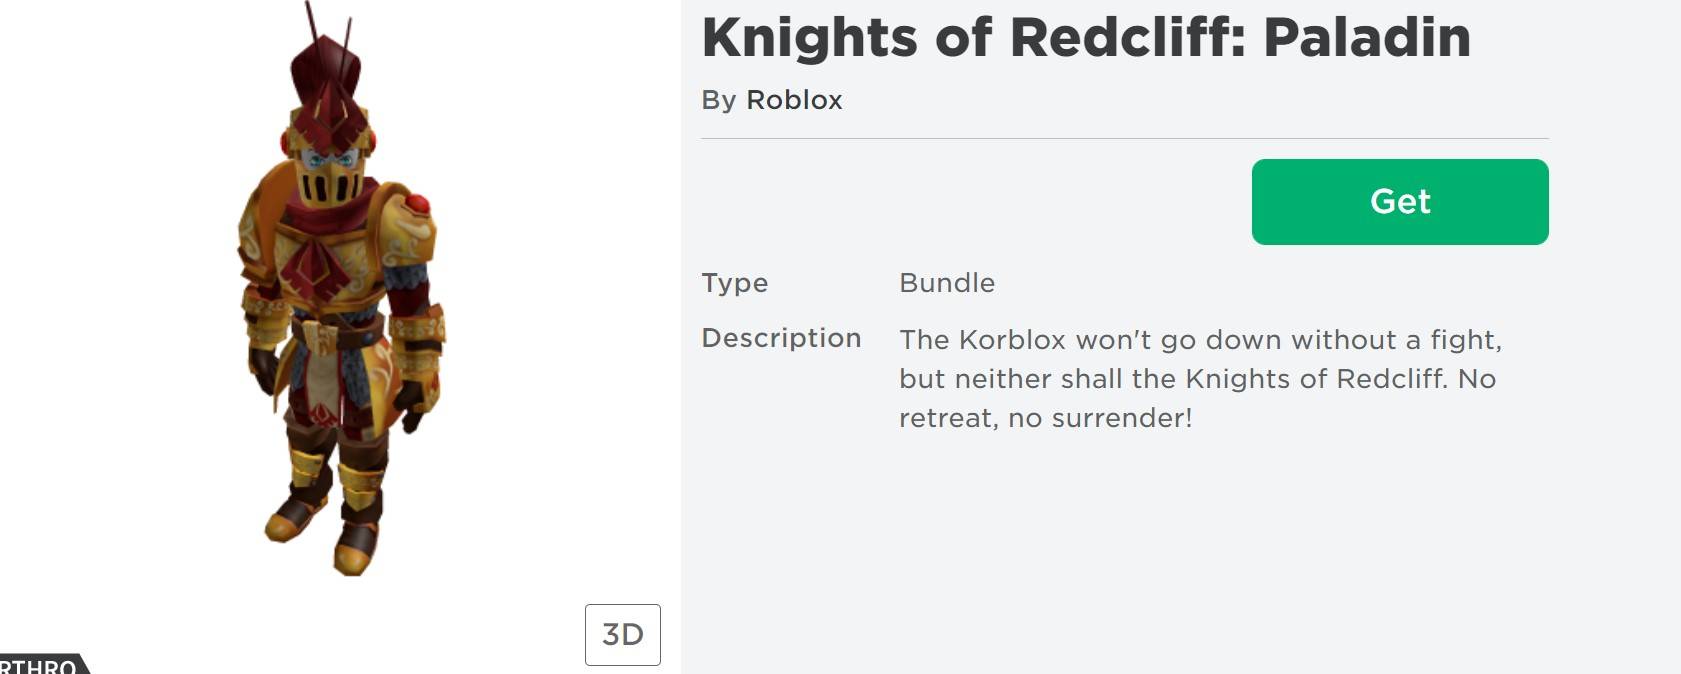 Roblox Promo Codes For Free Items In June 2021 - roblox knight helmet id